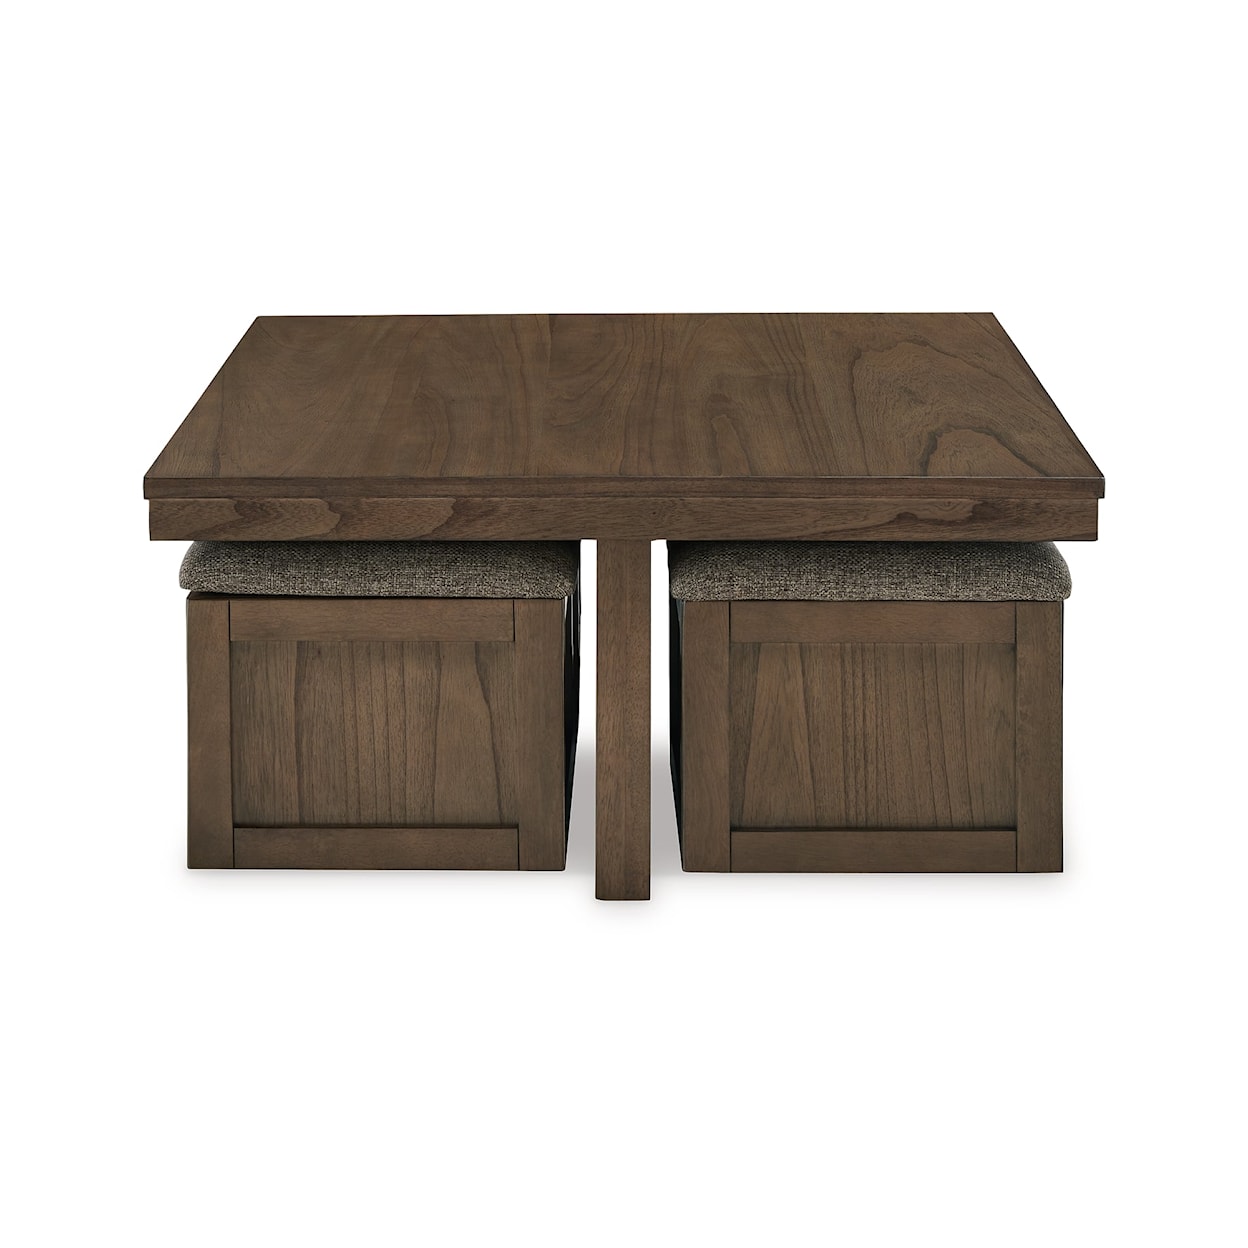 Signature Design by Ashley Boardernest Coffee Table with 4 Stools